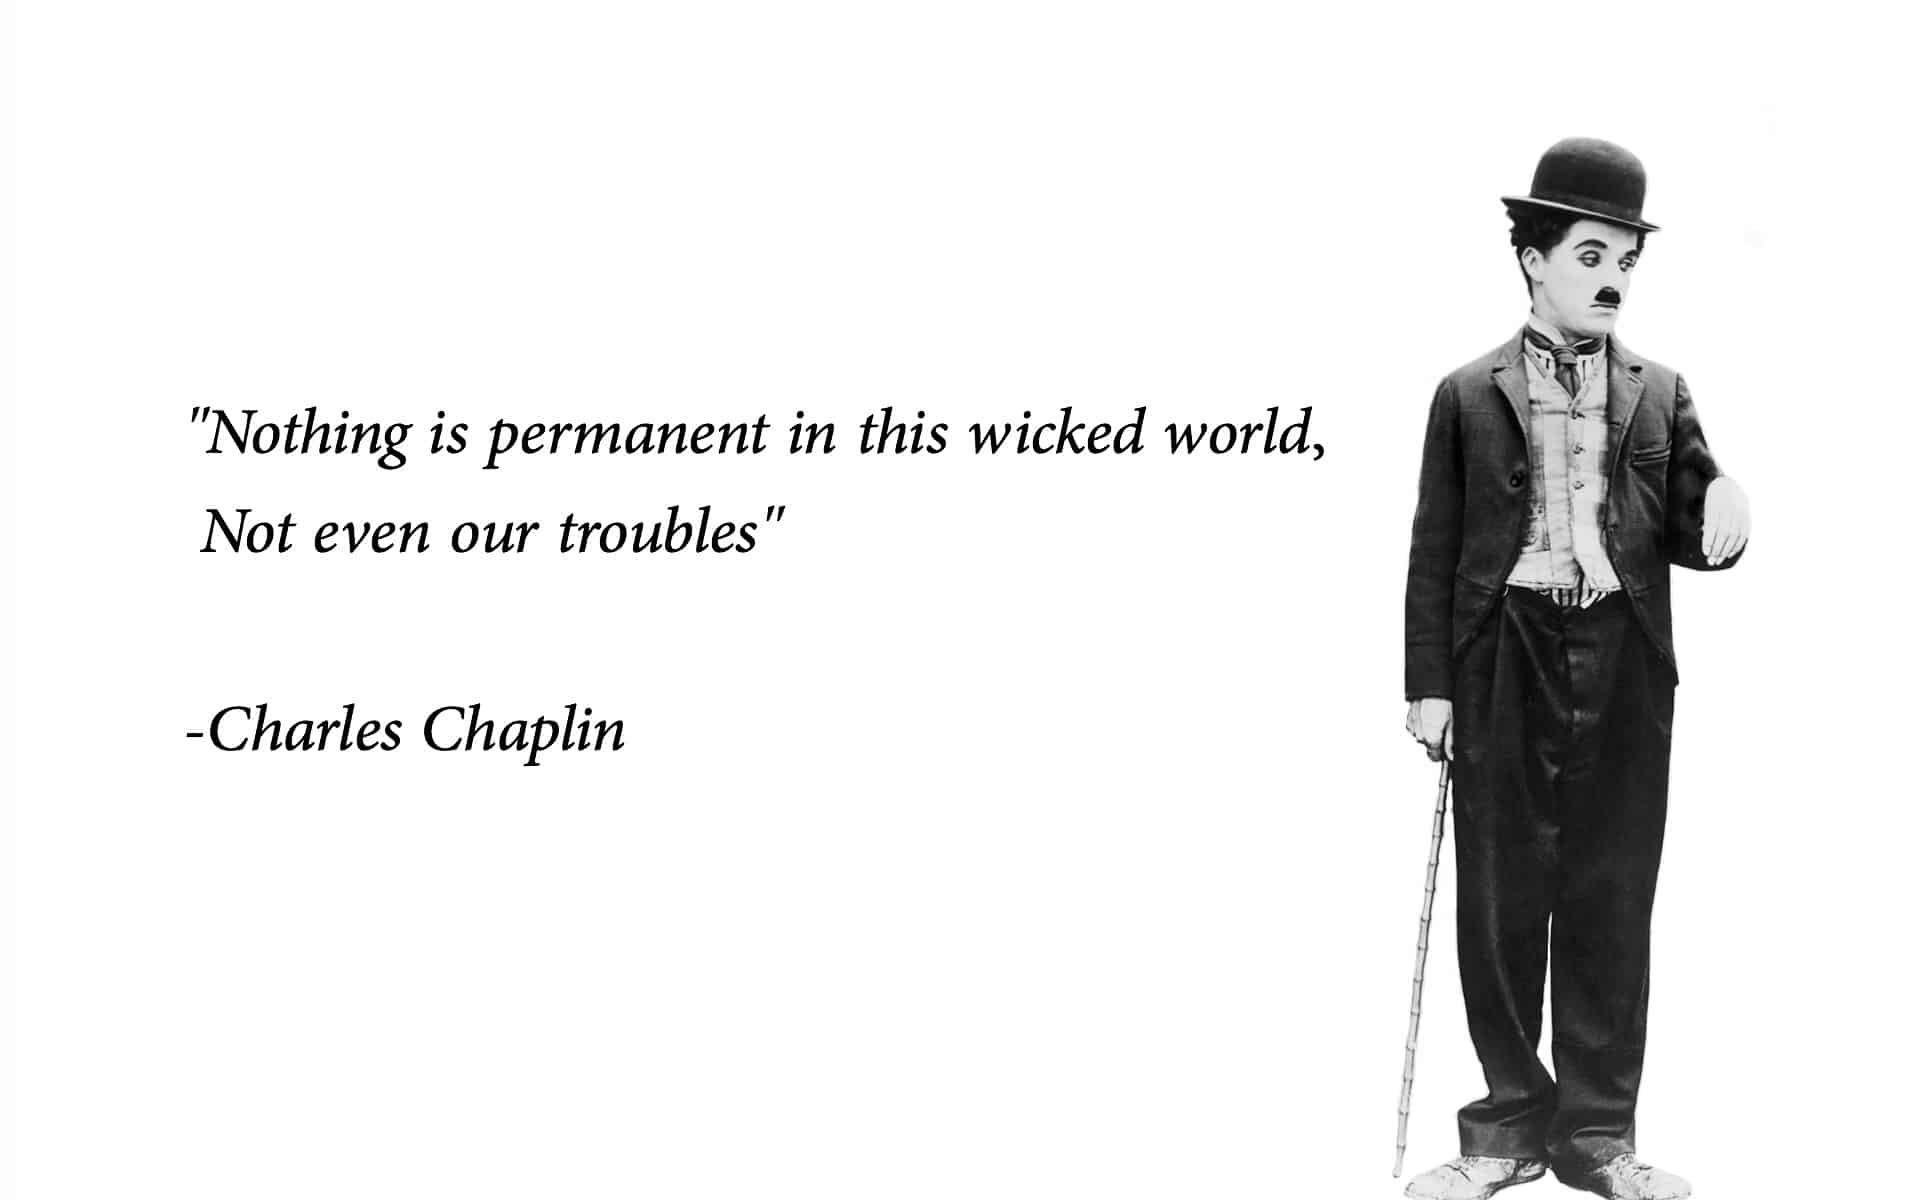 charlie chaplin wicked quote